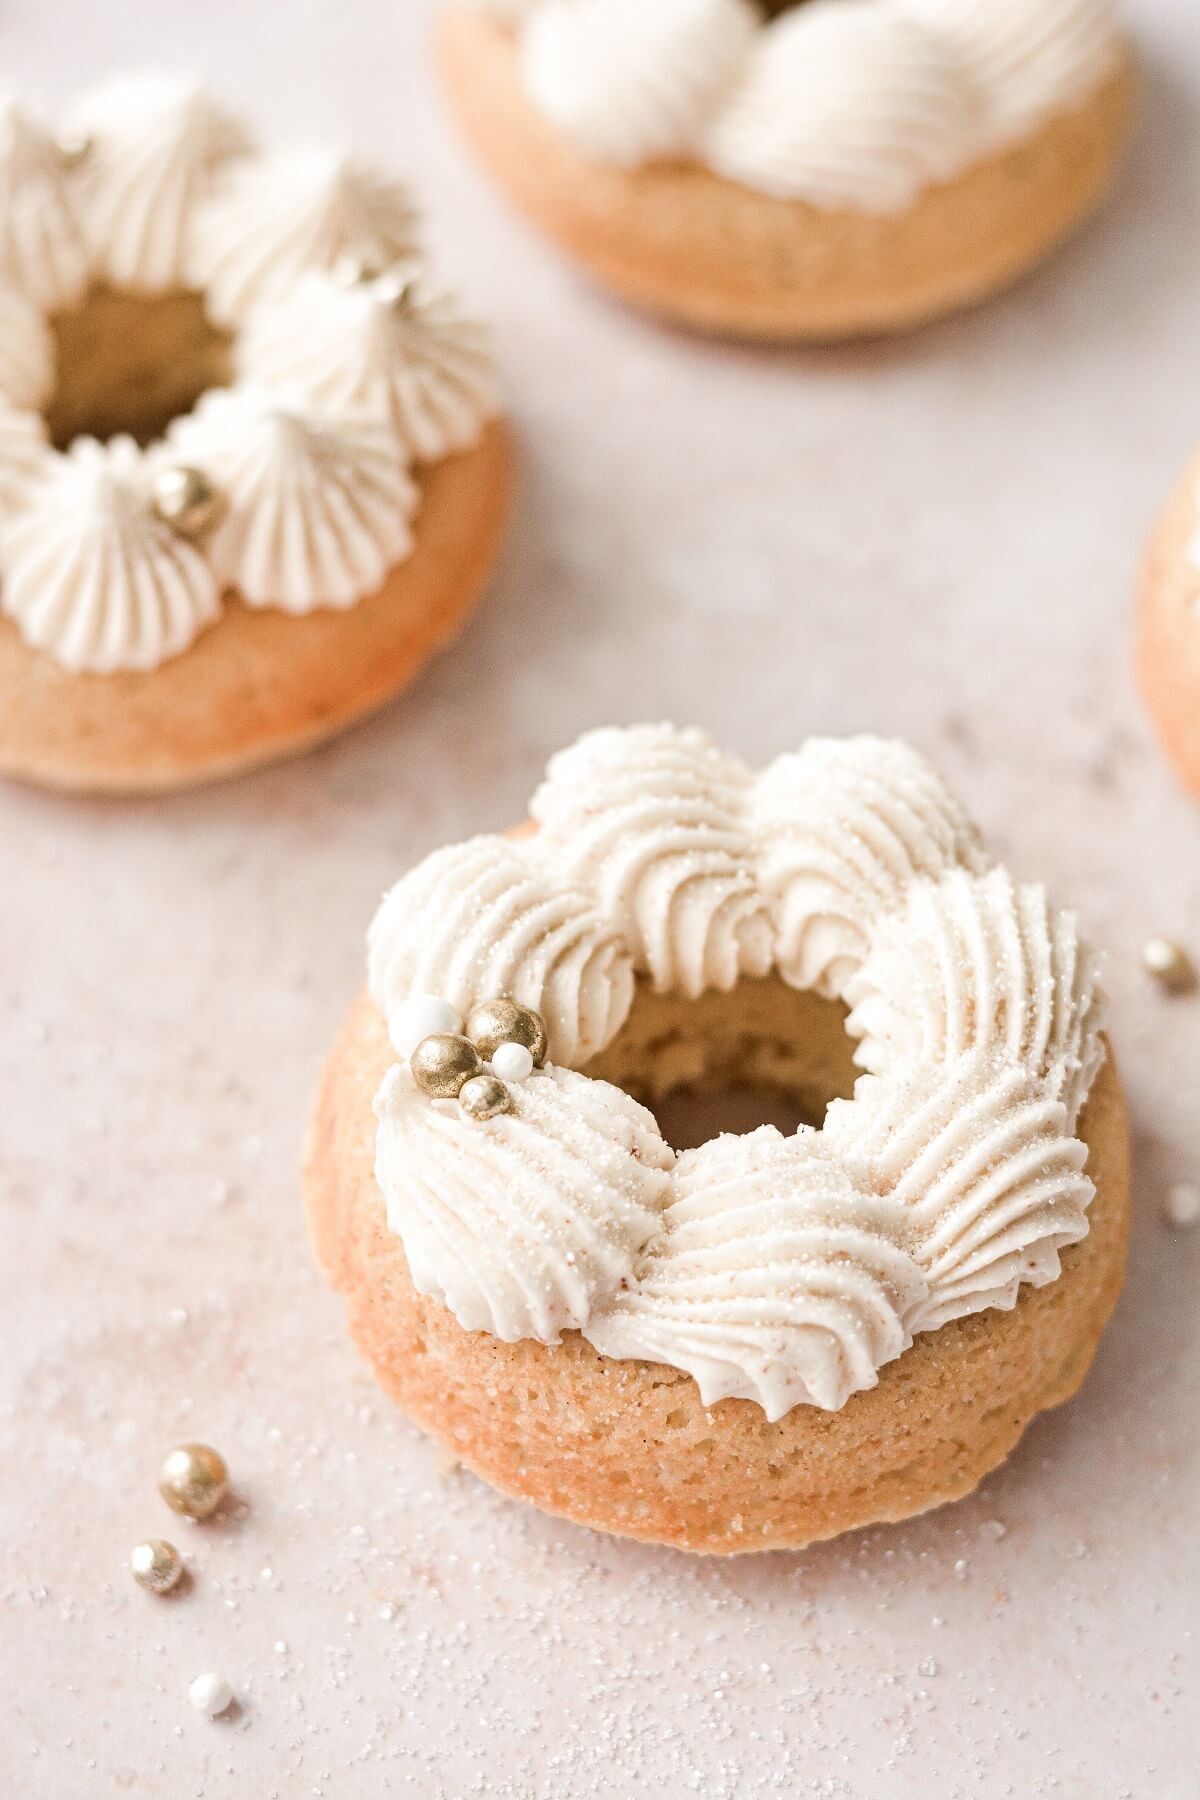 Baked vanilla cake doughnuts with piped buttercream and gold sprinkles.